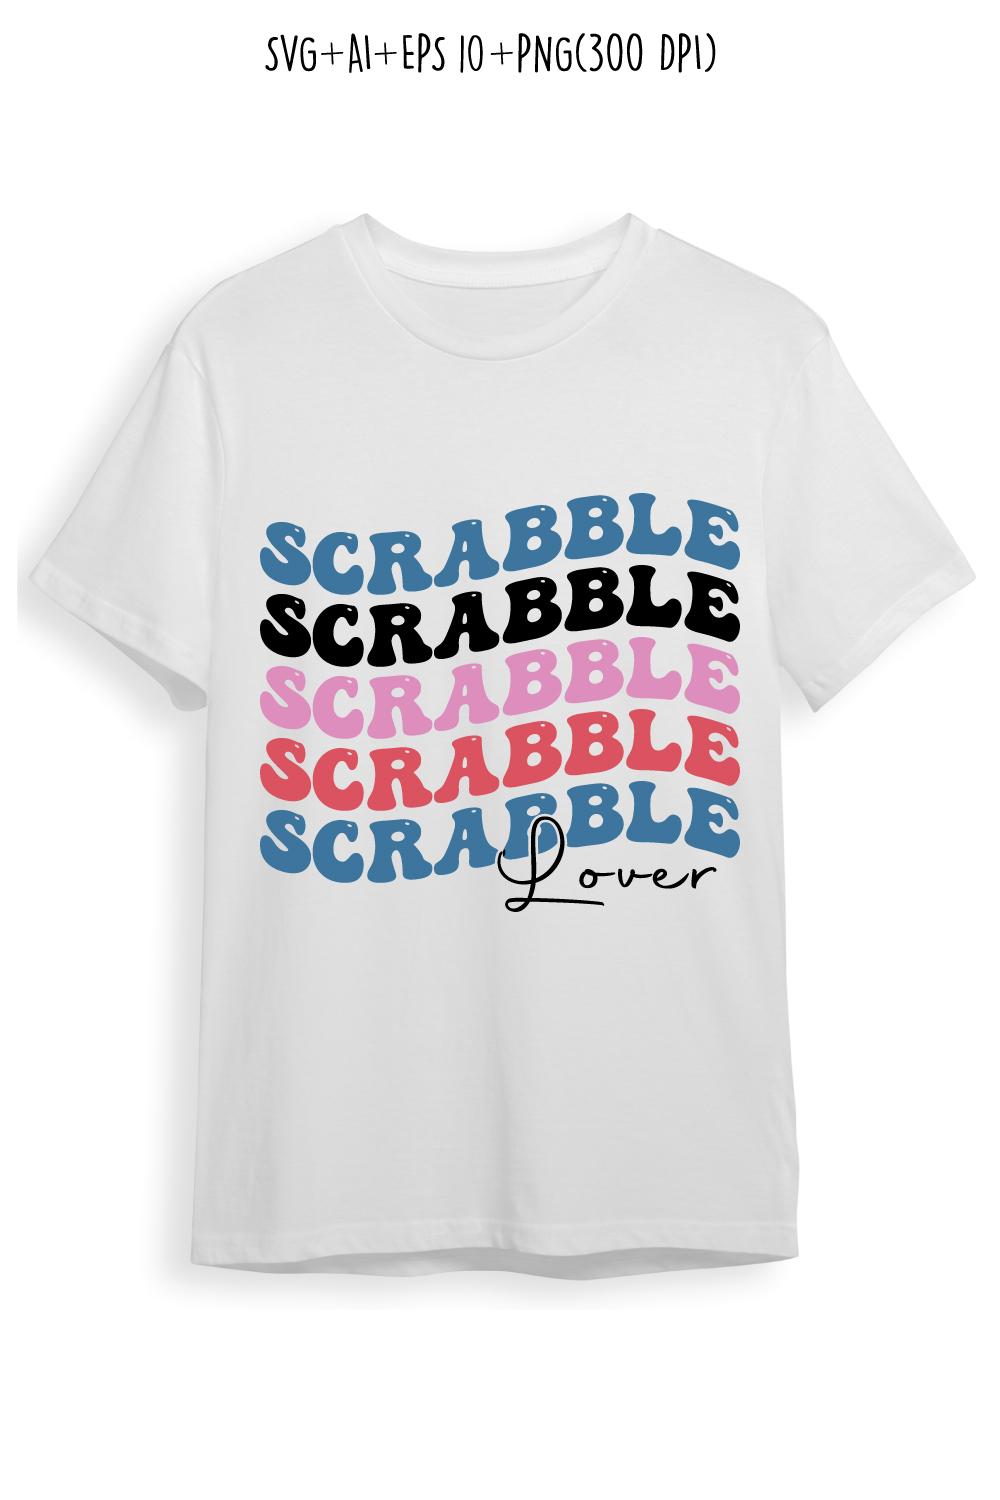 Scrabble lover indoor game retro typography design for t-shirts, cards, frame artwork, phone cases, bags, mugs, stickers, tumblers, print, etc pinterest preview image.